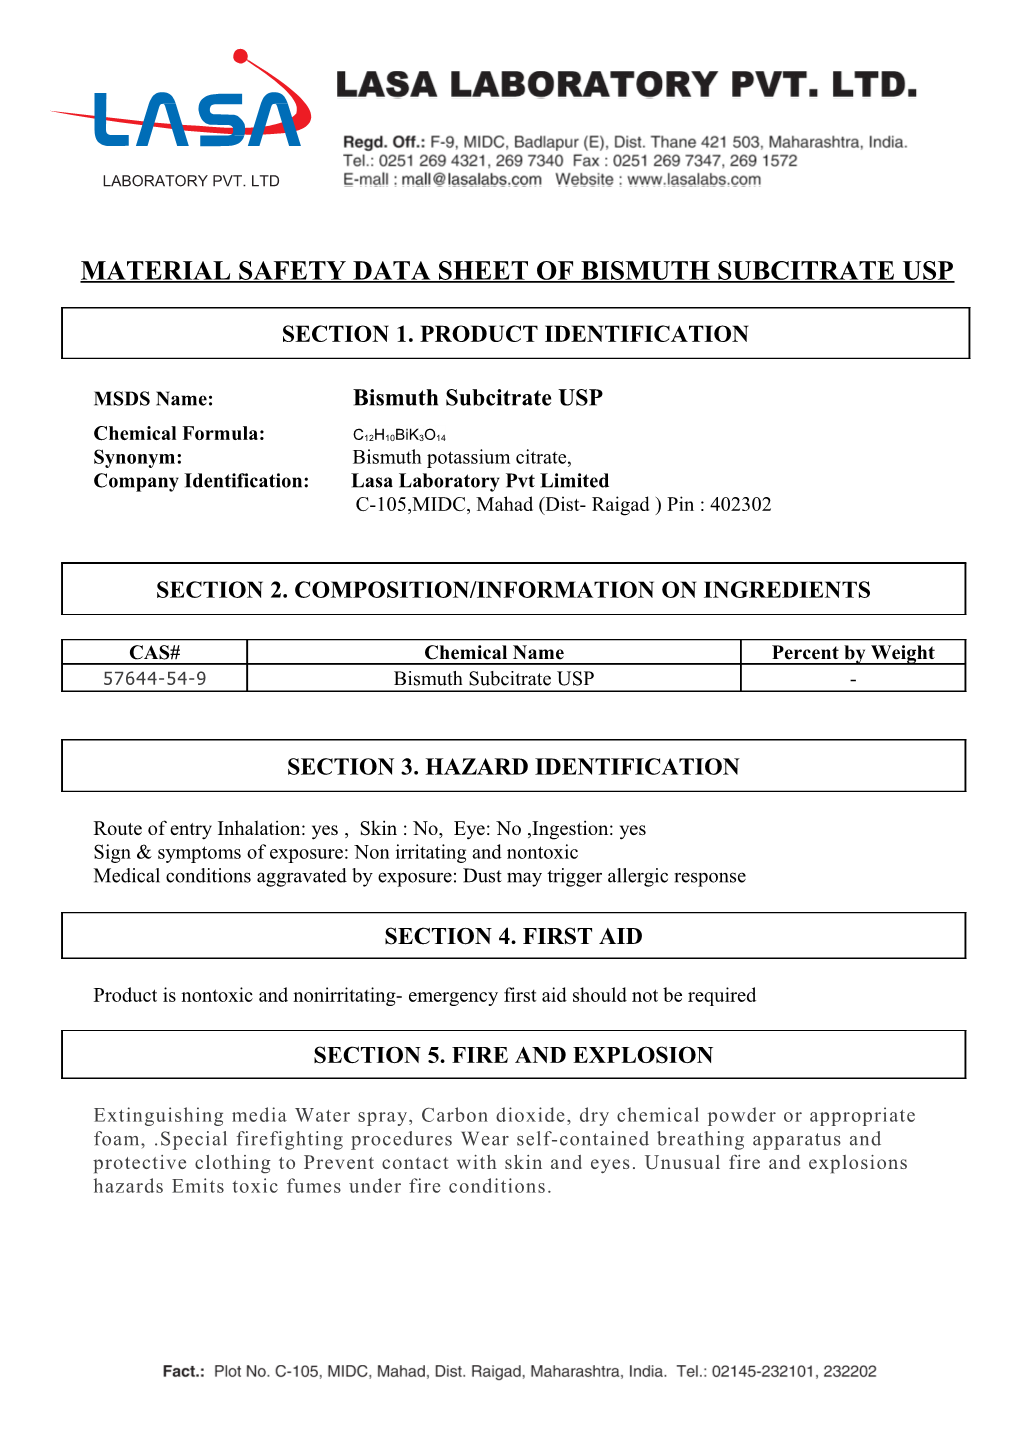 Material Safety Data Sheet of Bismuth Subcitrate Usp